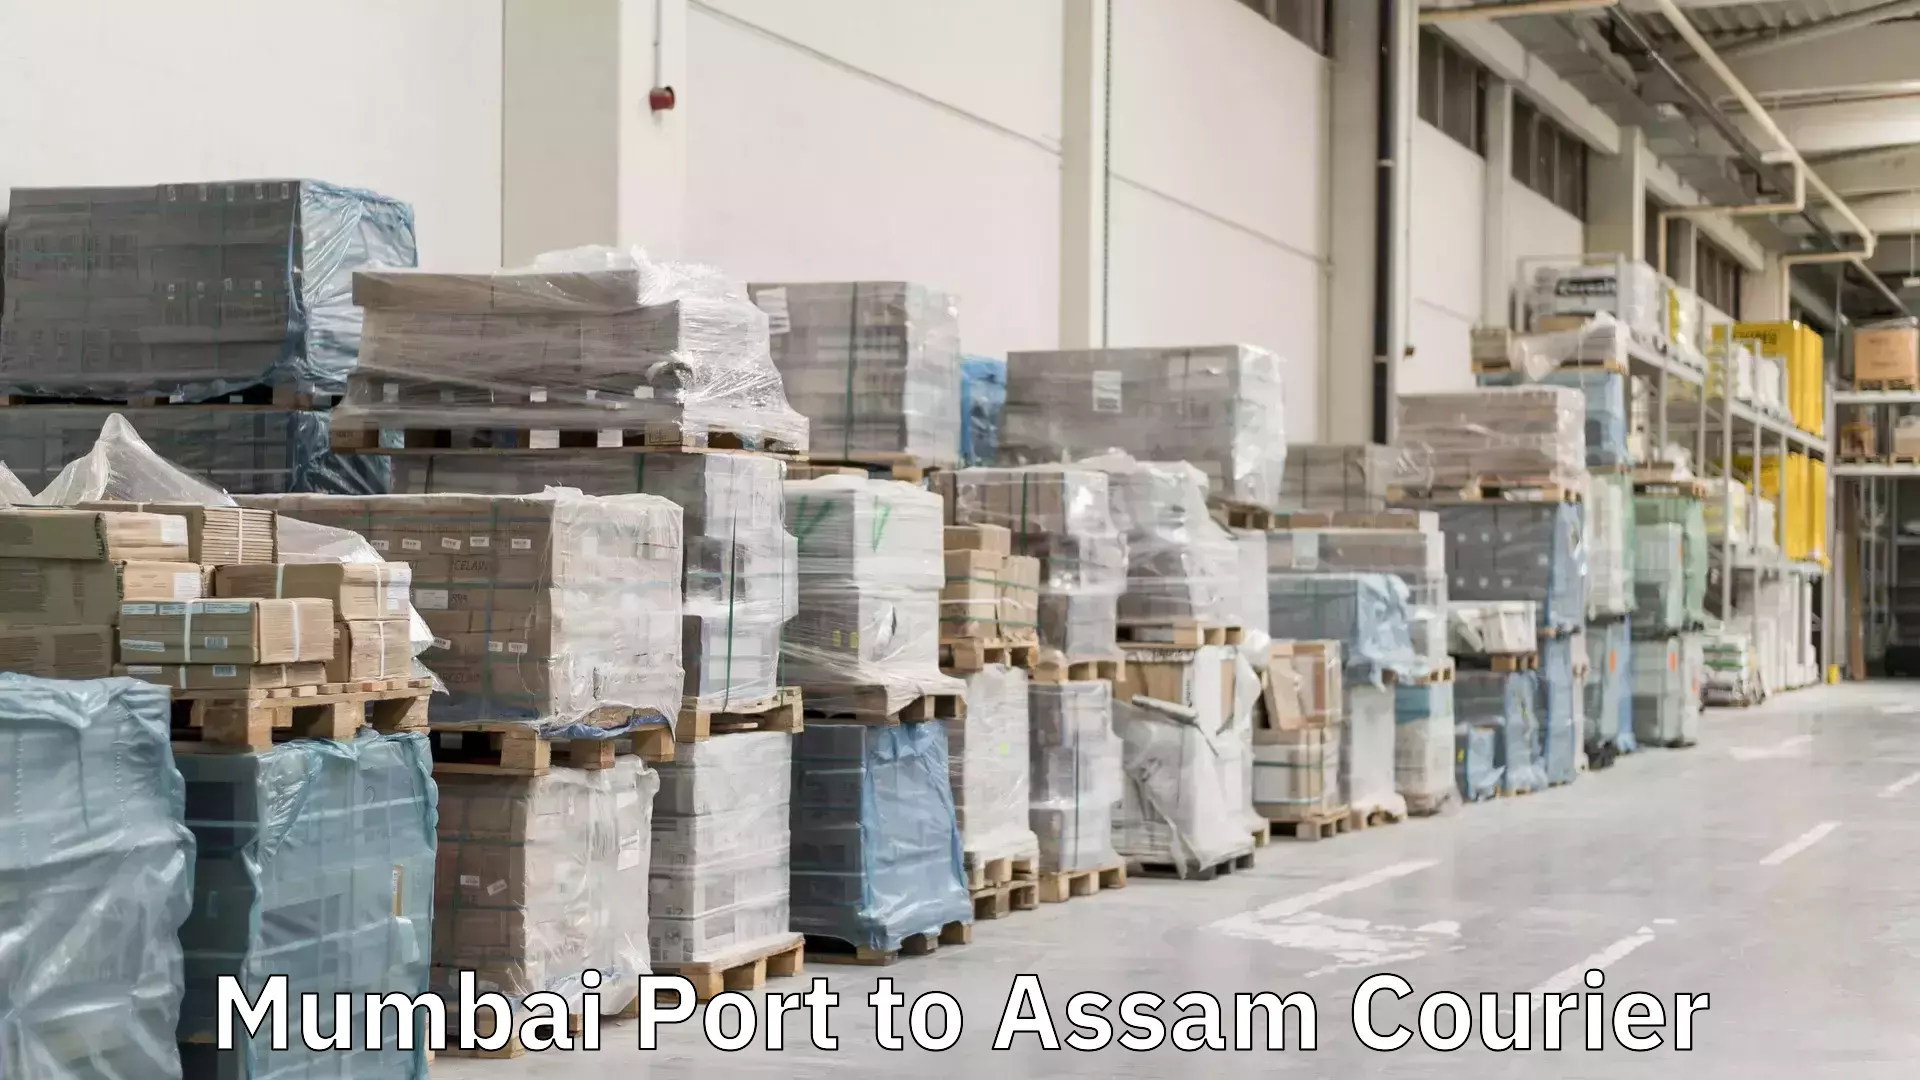 Next-day freight services in Mumbai Port to Assam